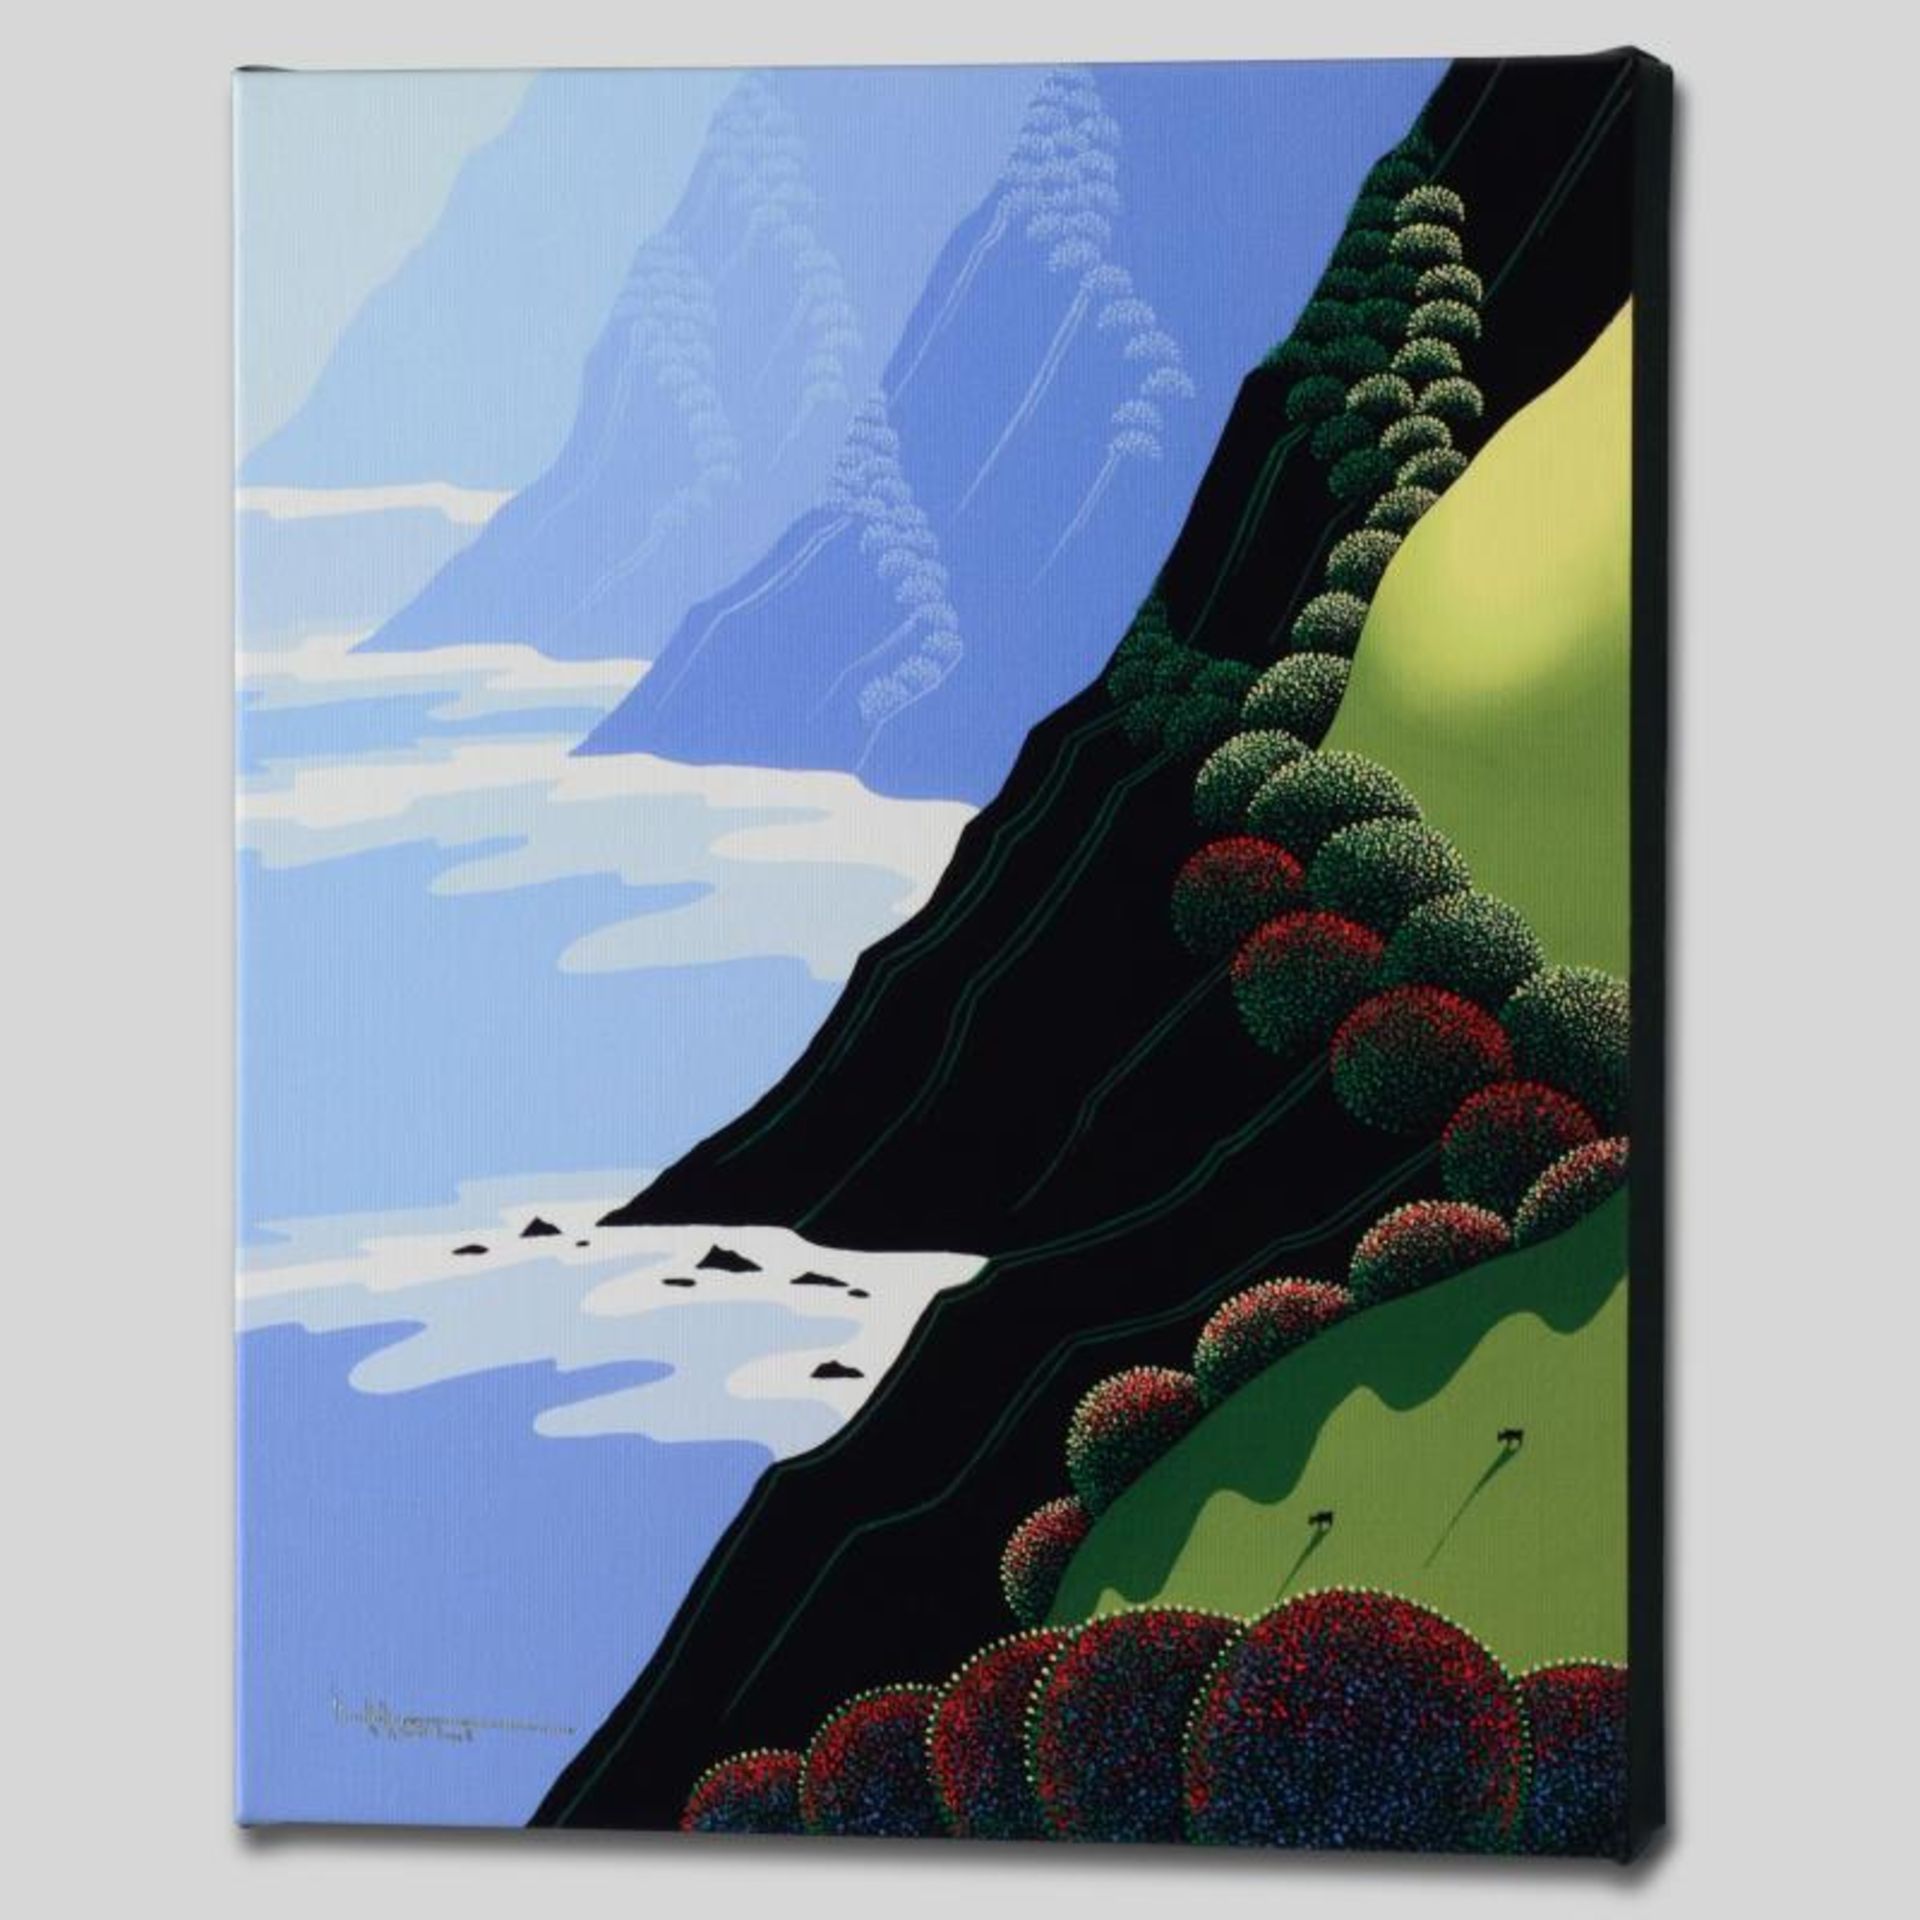 "Emerald Cliffs" Limited Edition Giclee on Canvas by Larissa Holt, Numbered and - Image 2 of 2